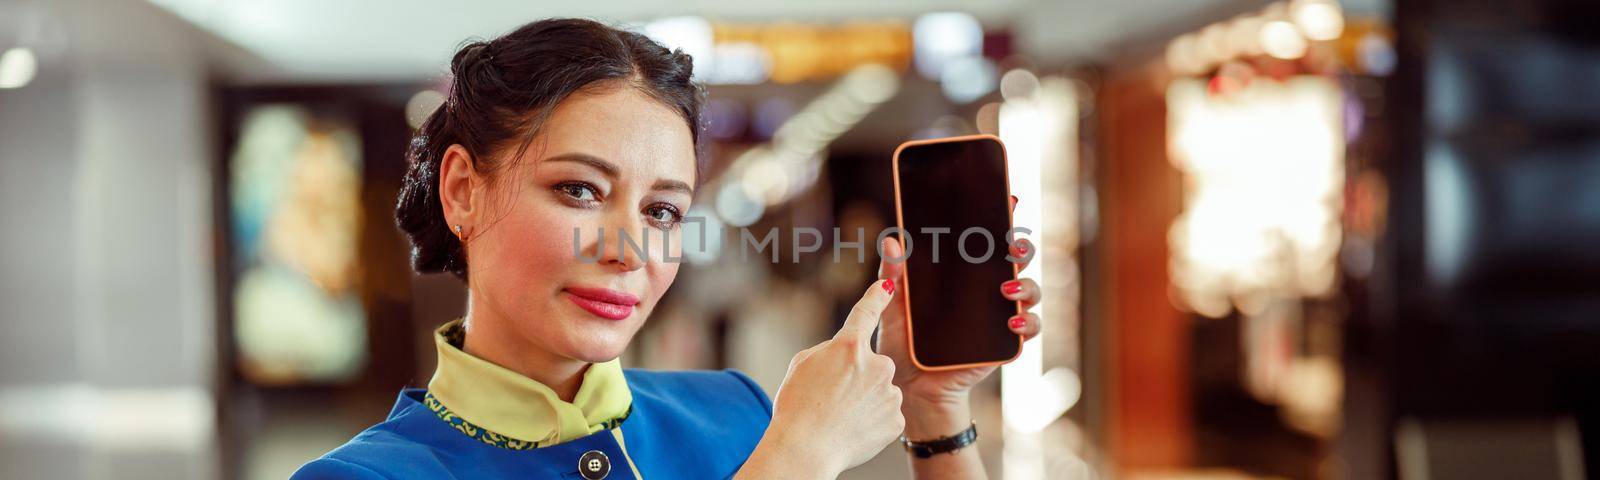 Woman stewardess in aviation air hostess uniform holding mobile phone and smiling while standing in airport terminal